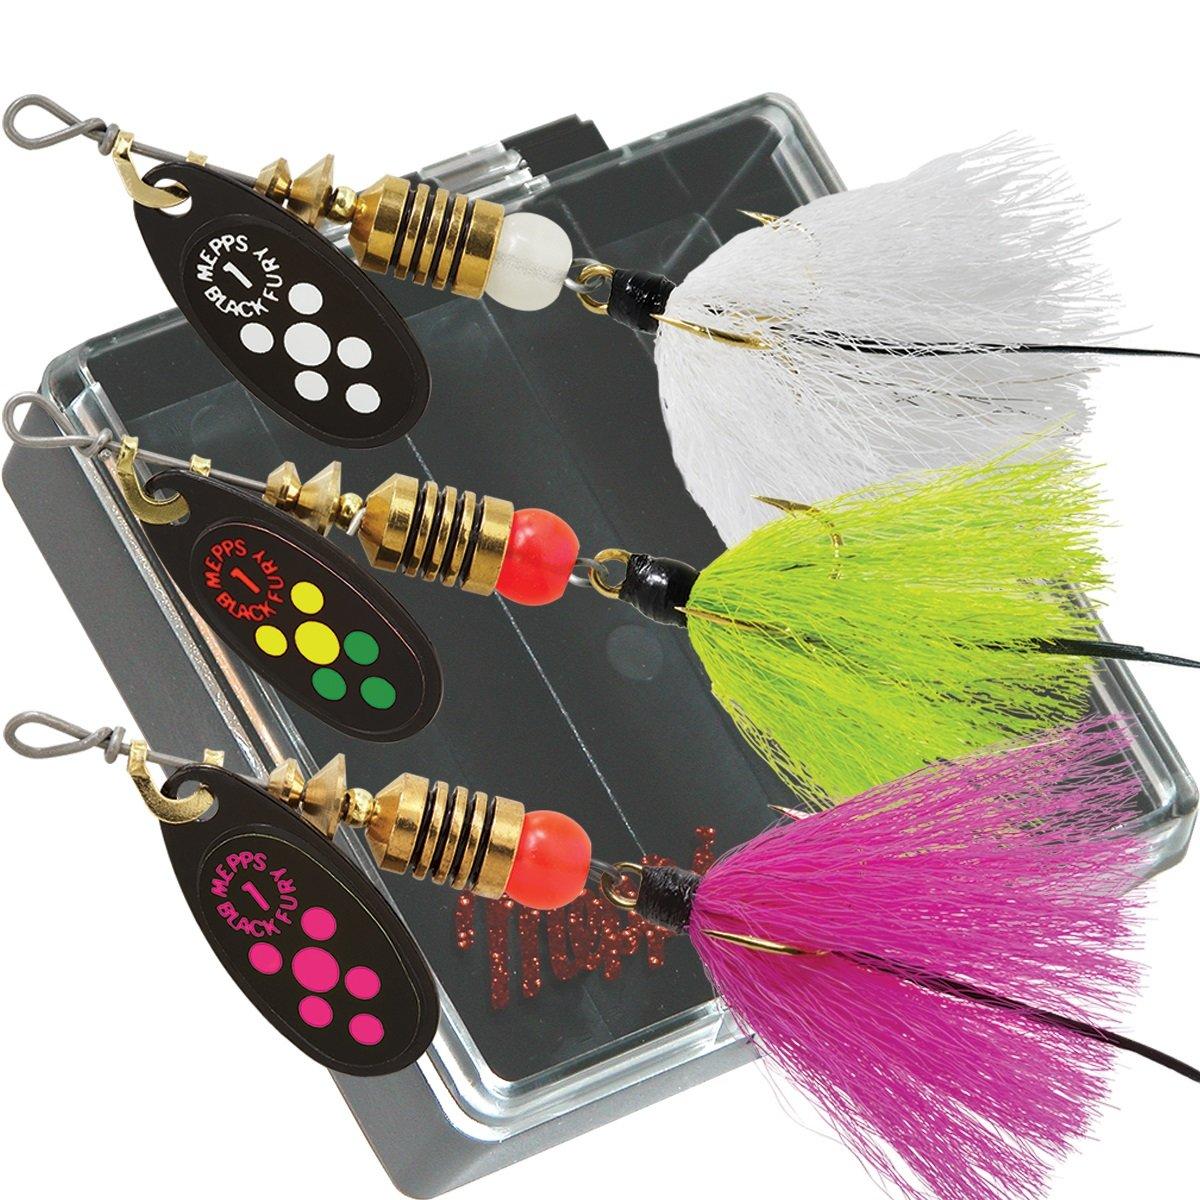 Mepps Black Fury Dressed Trout Fishing Lure Pocket Pack